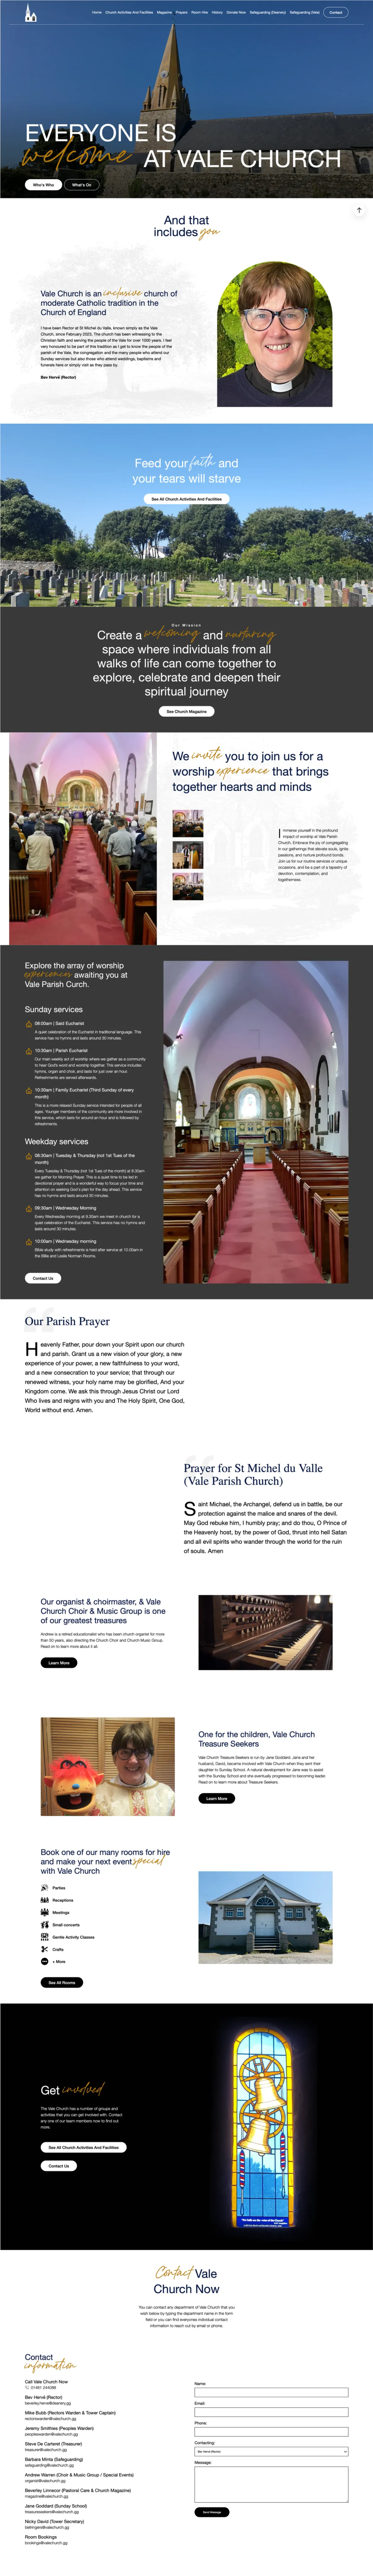 Vale Church Home Page Full Size Screenshot